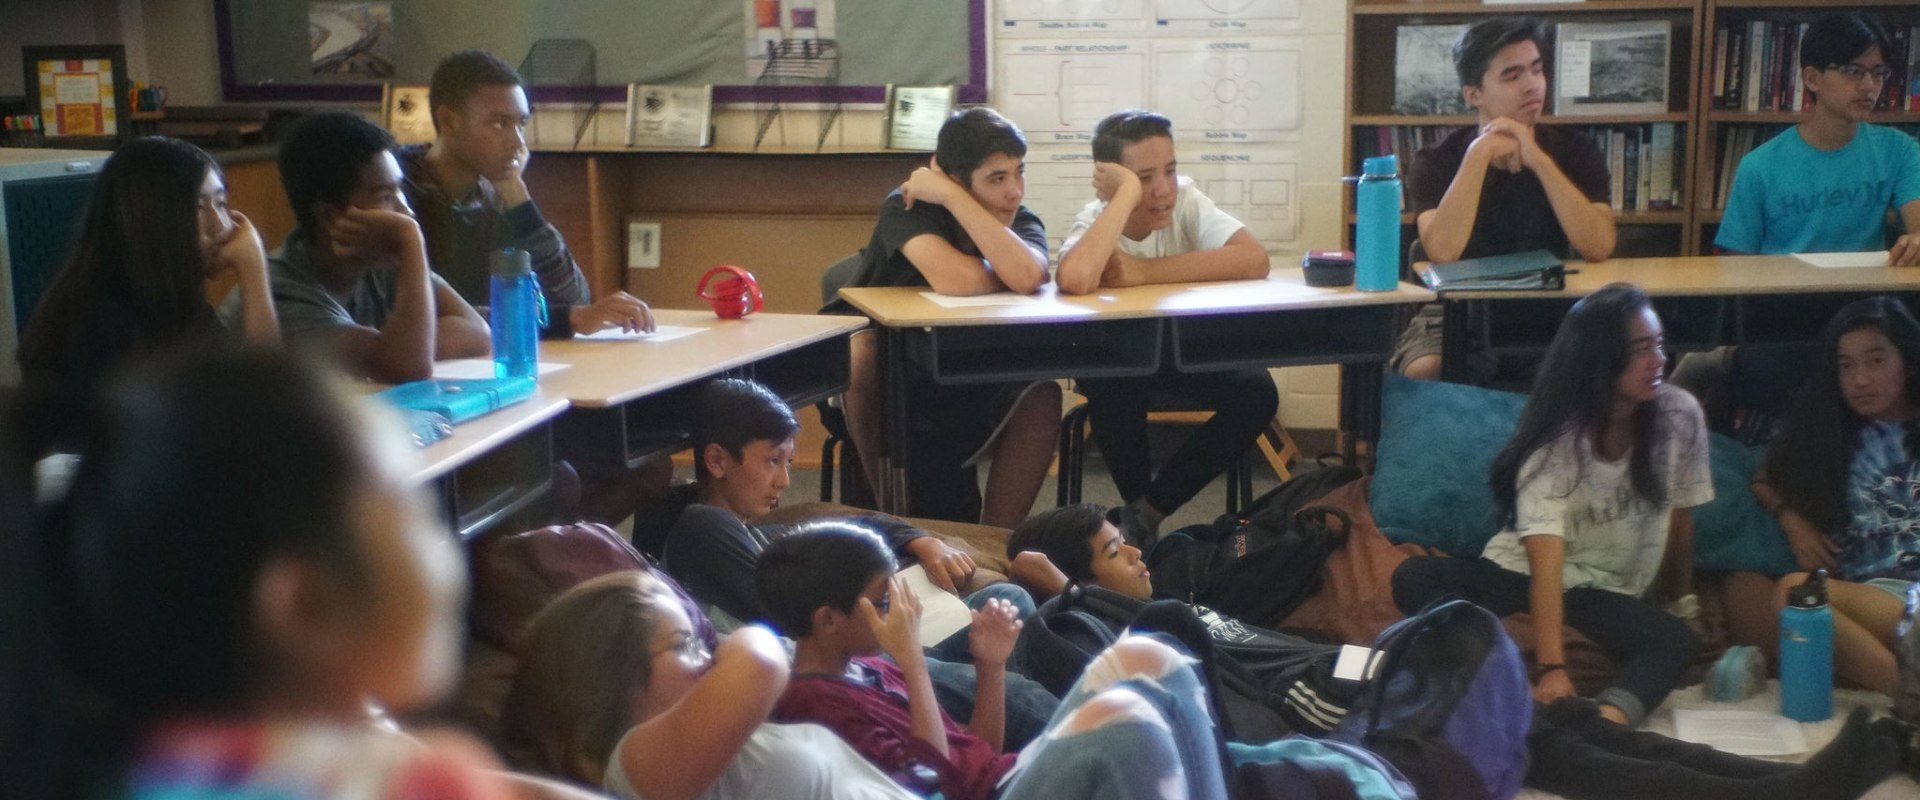 Growth and Inspiration: A Verto Hawaii Student's Perspective on Teaching in the Aloha State